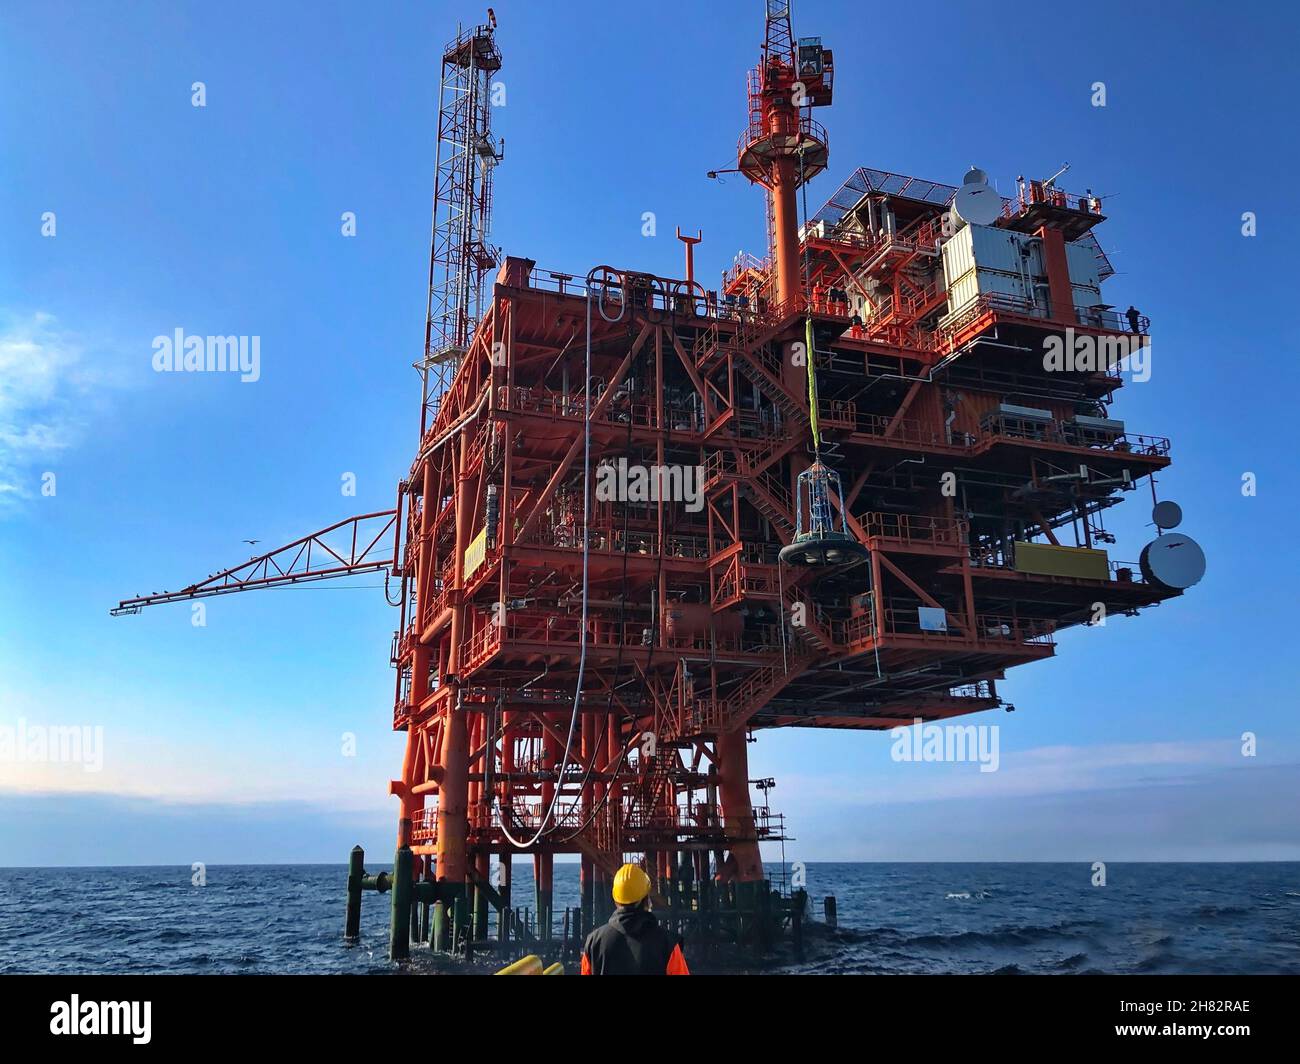 Oil and gas platform at sea Stock Photo